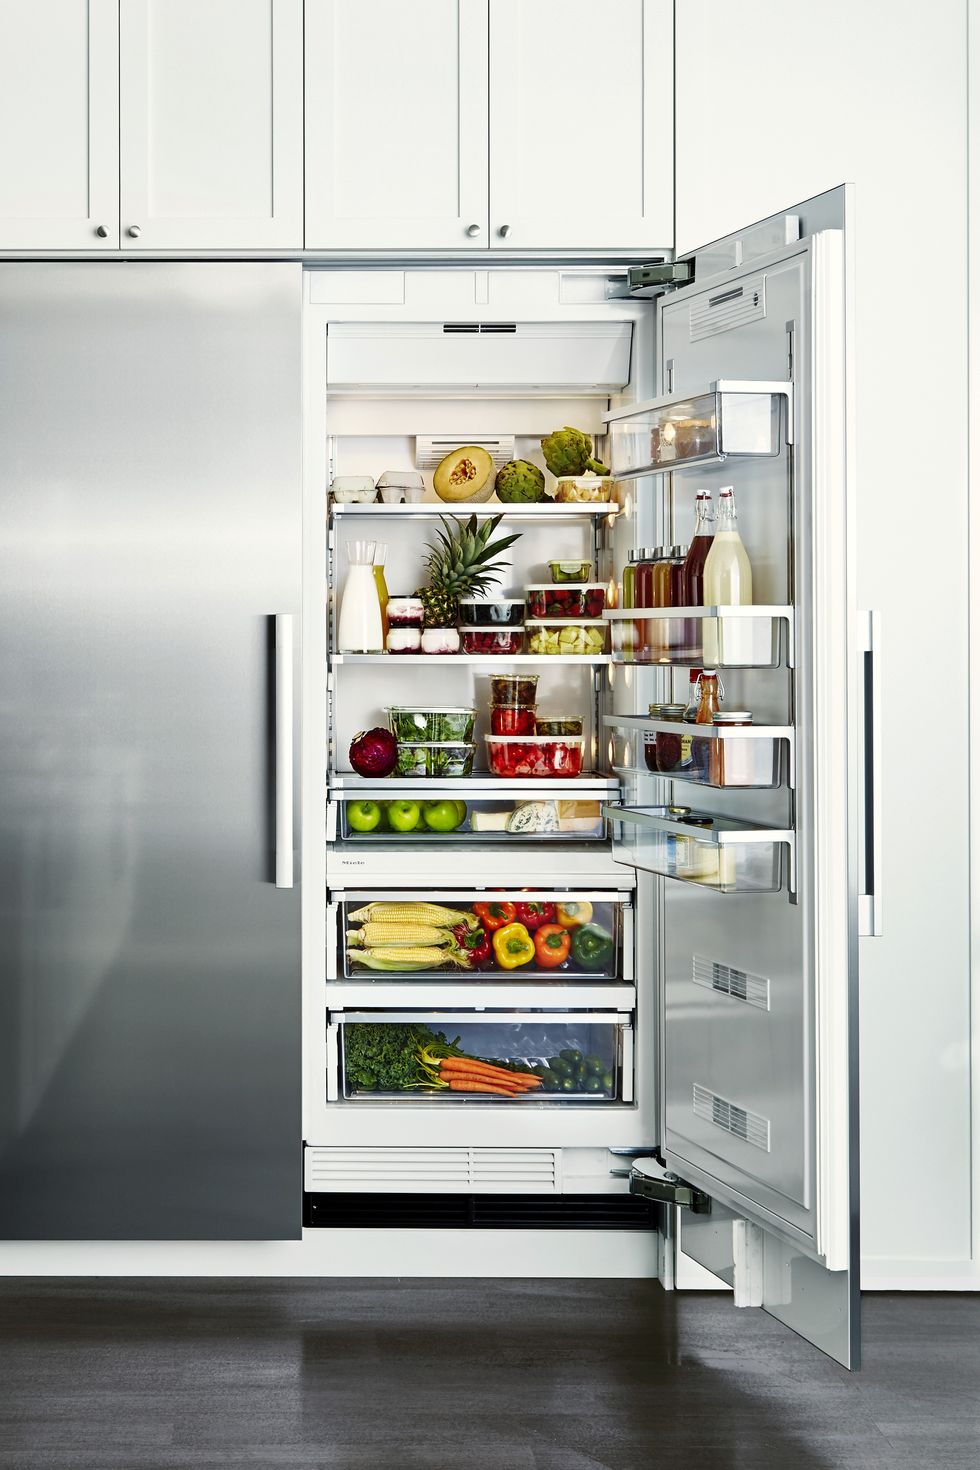 refrigerator with fruits and vegetables